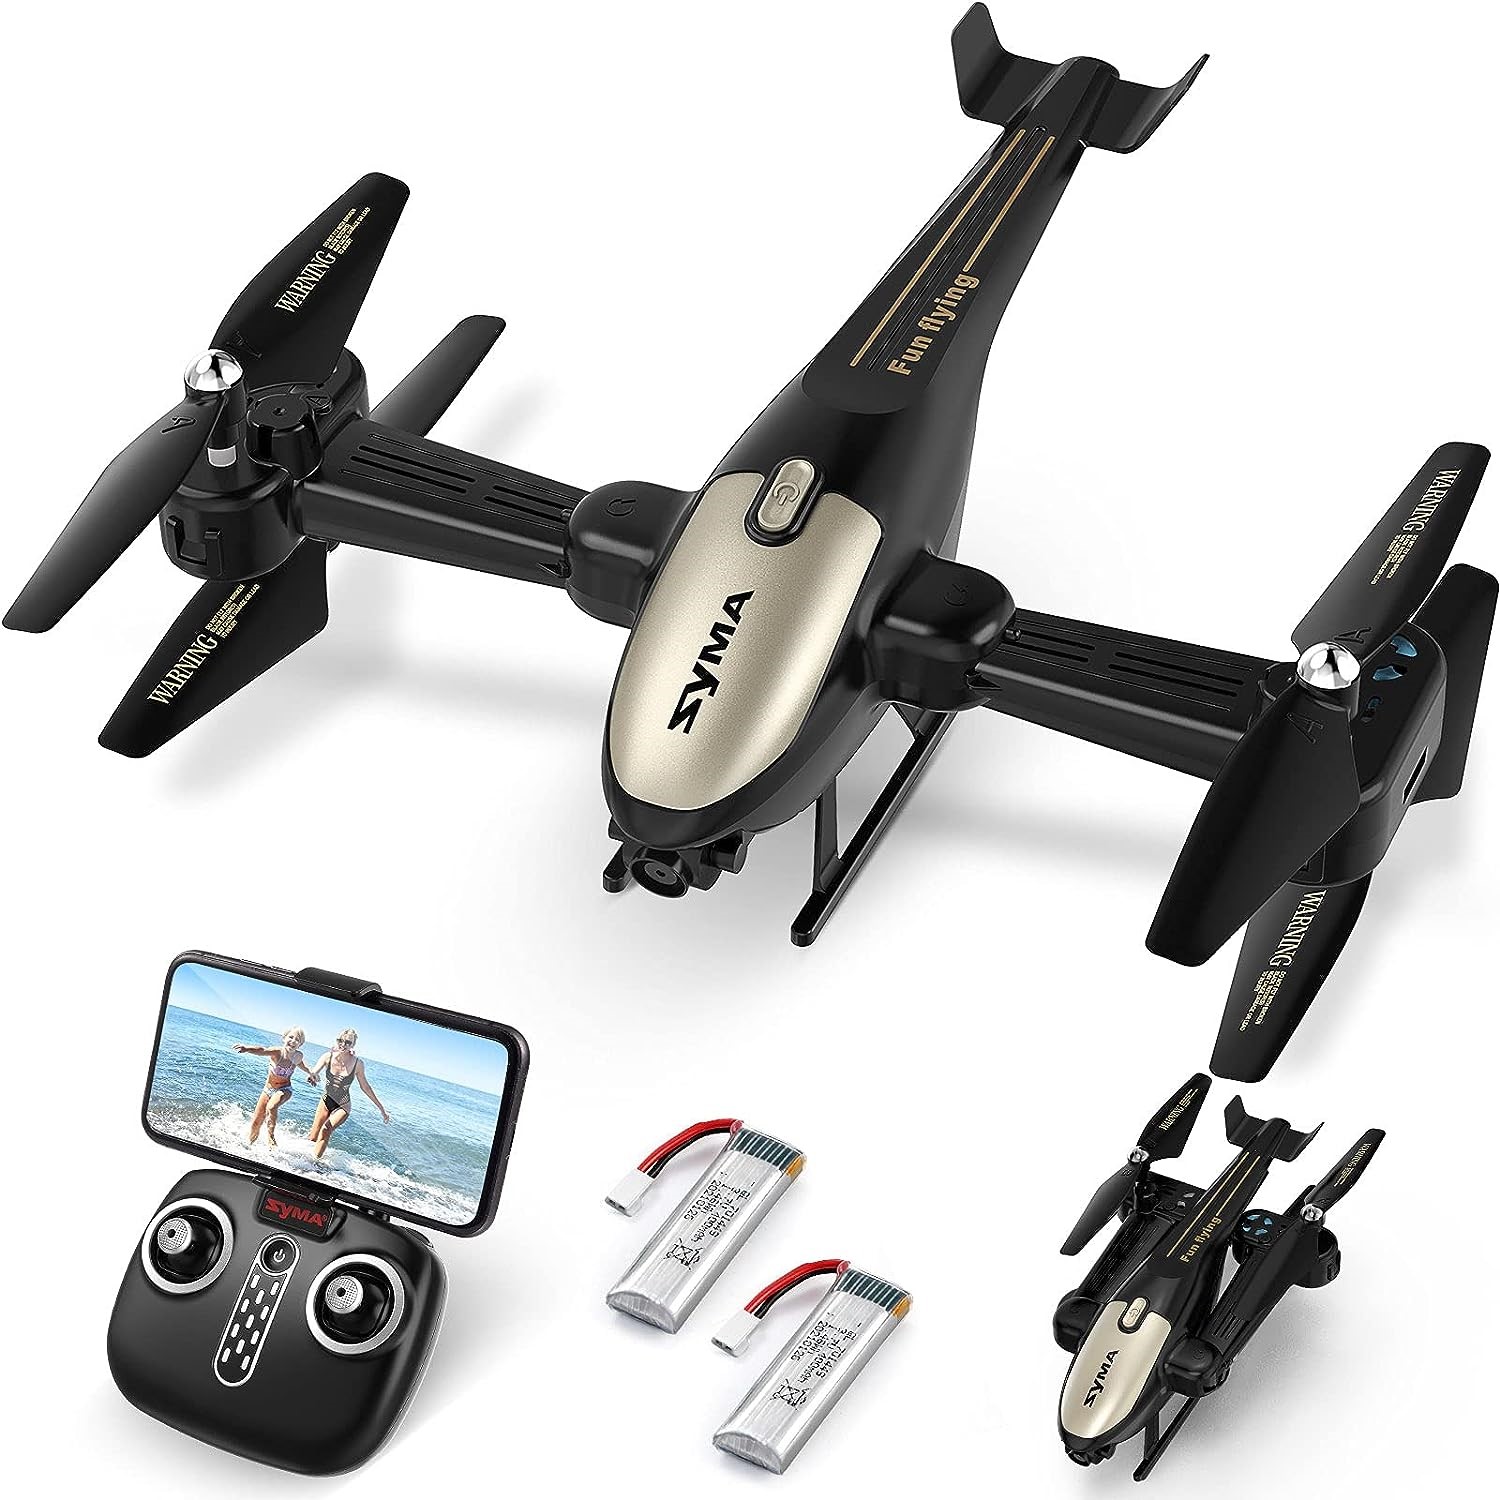 SYMA Helicopter Drone with Camera | DeviceDaily.com